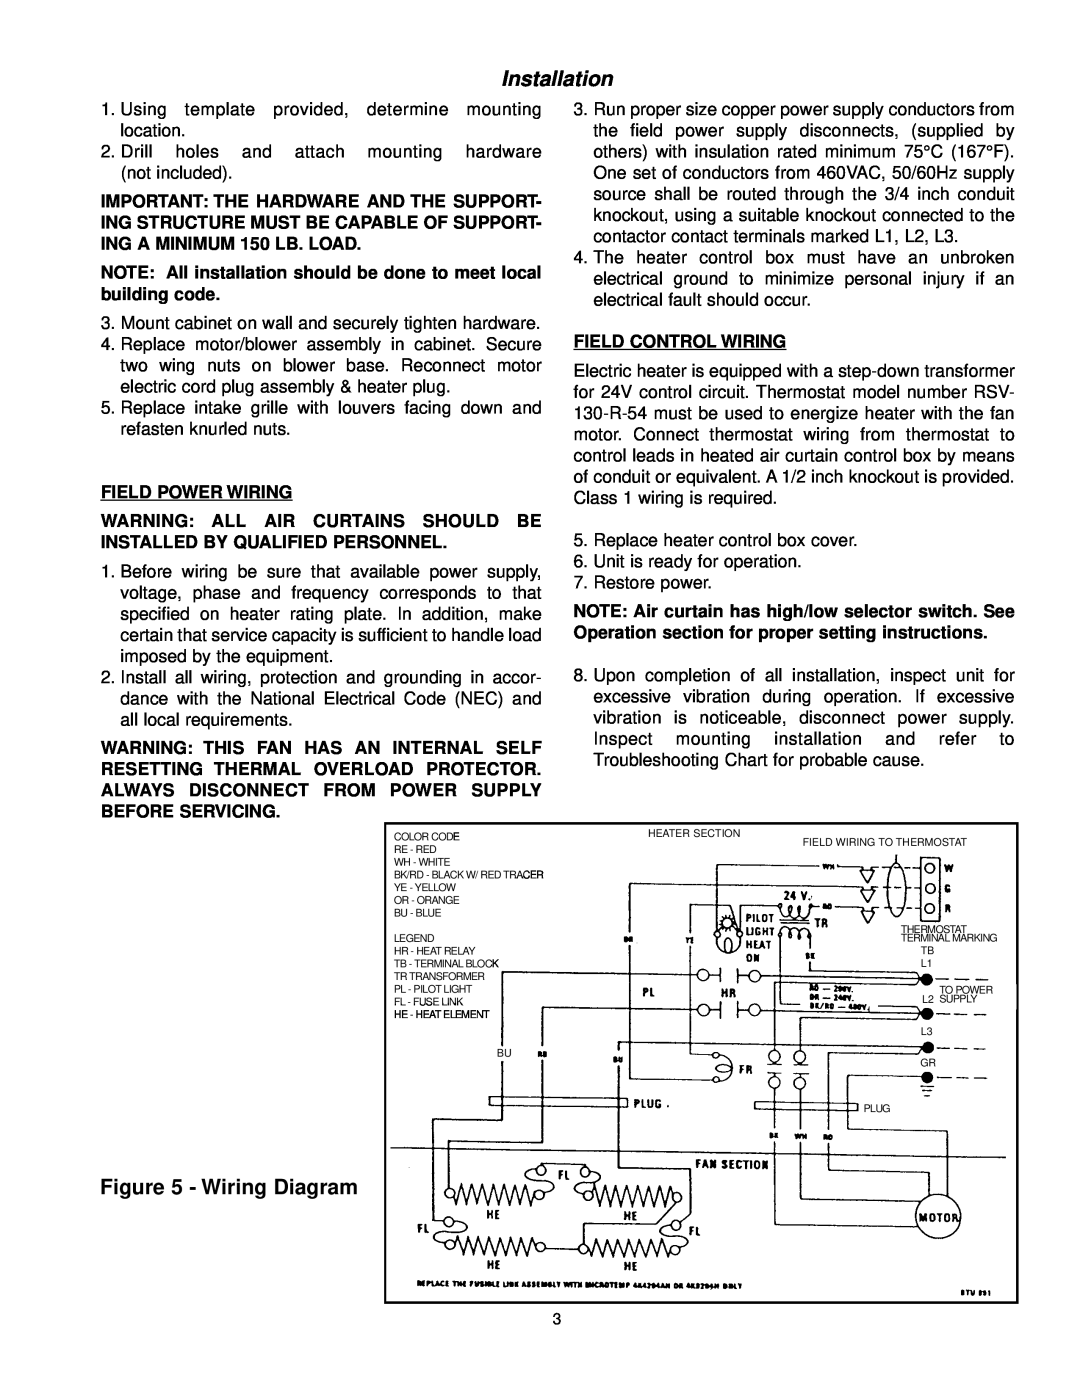 Marley Engineered Products E4806-1125HFD, E6012-2125HFD, E6009-2125HFD Installation, Wiring Diagram, Field Power Wiring 